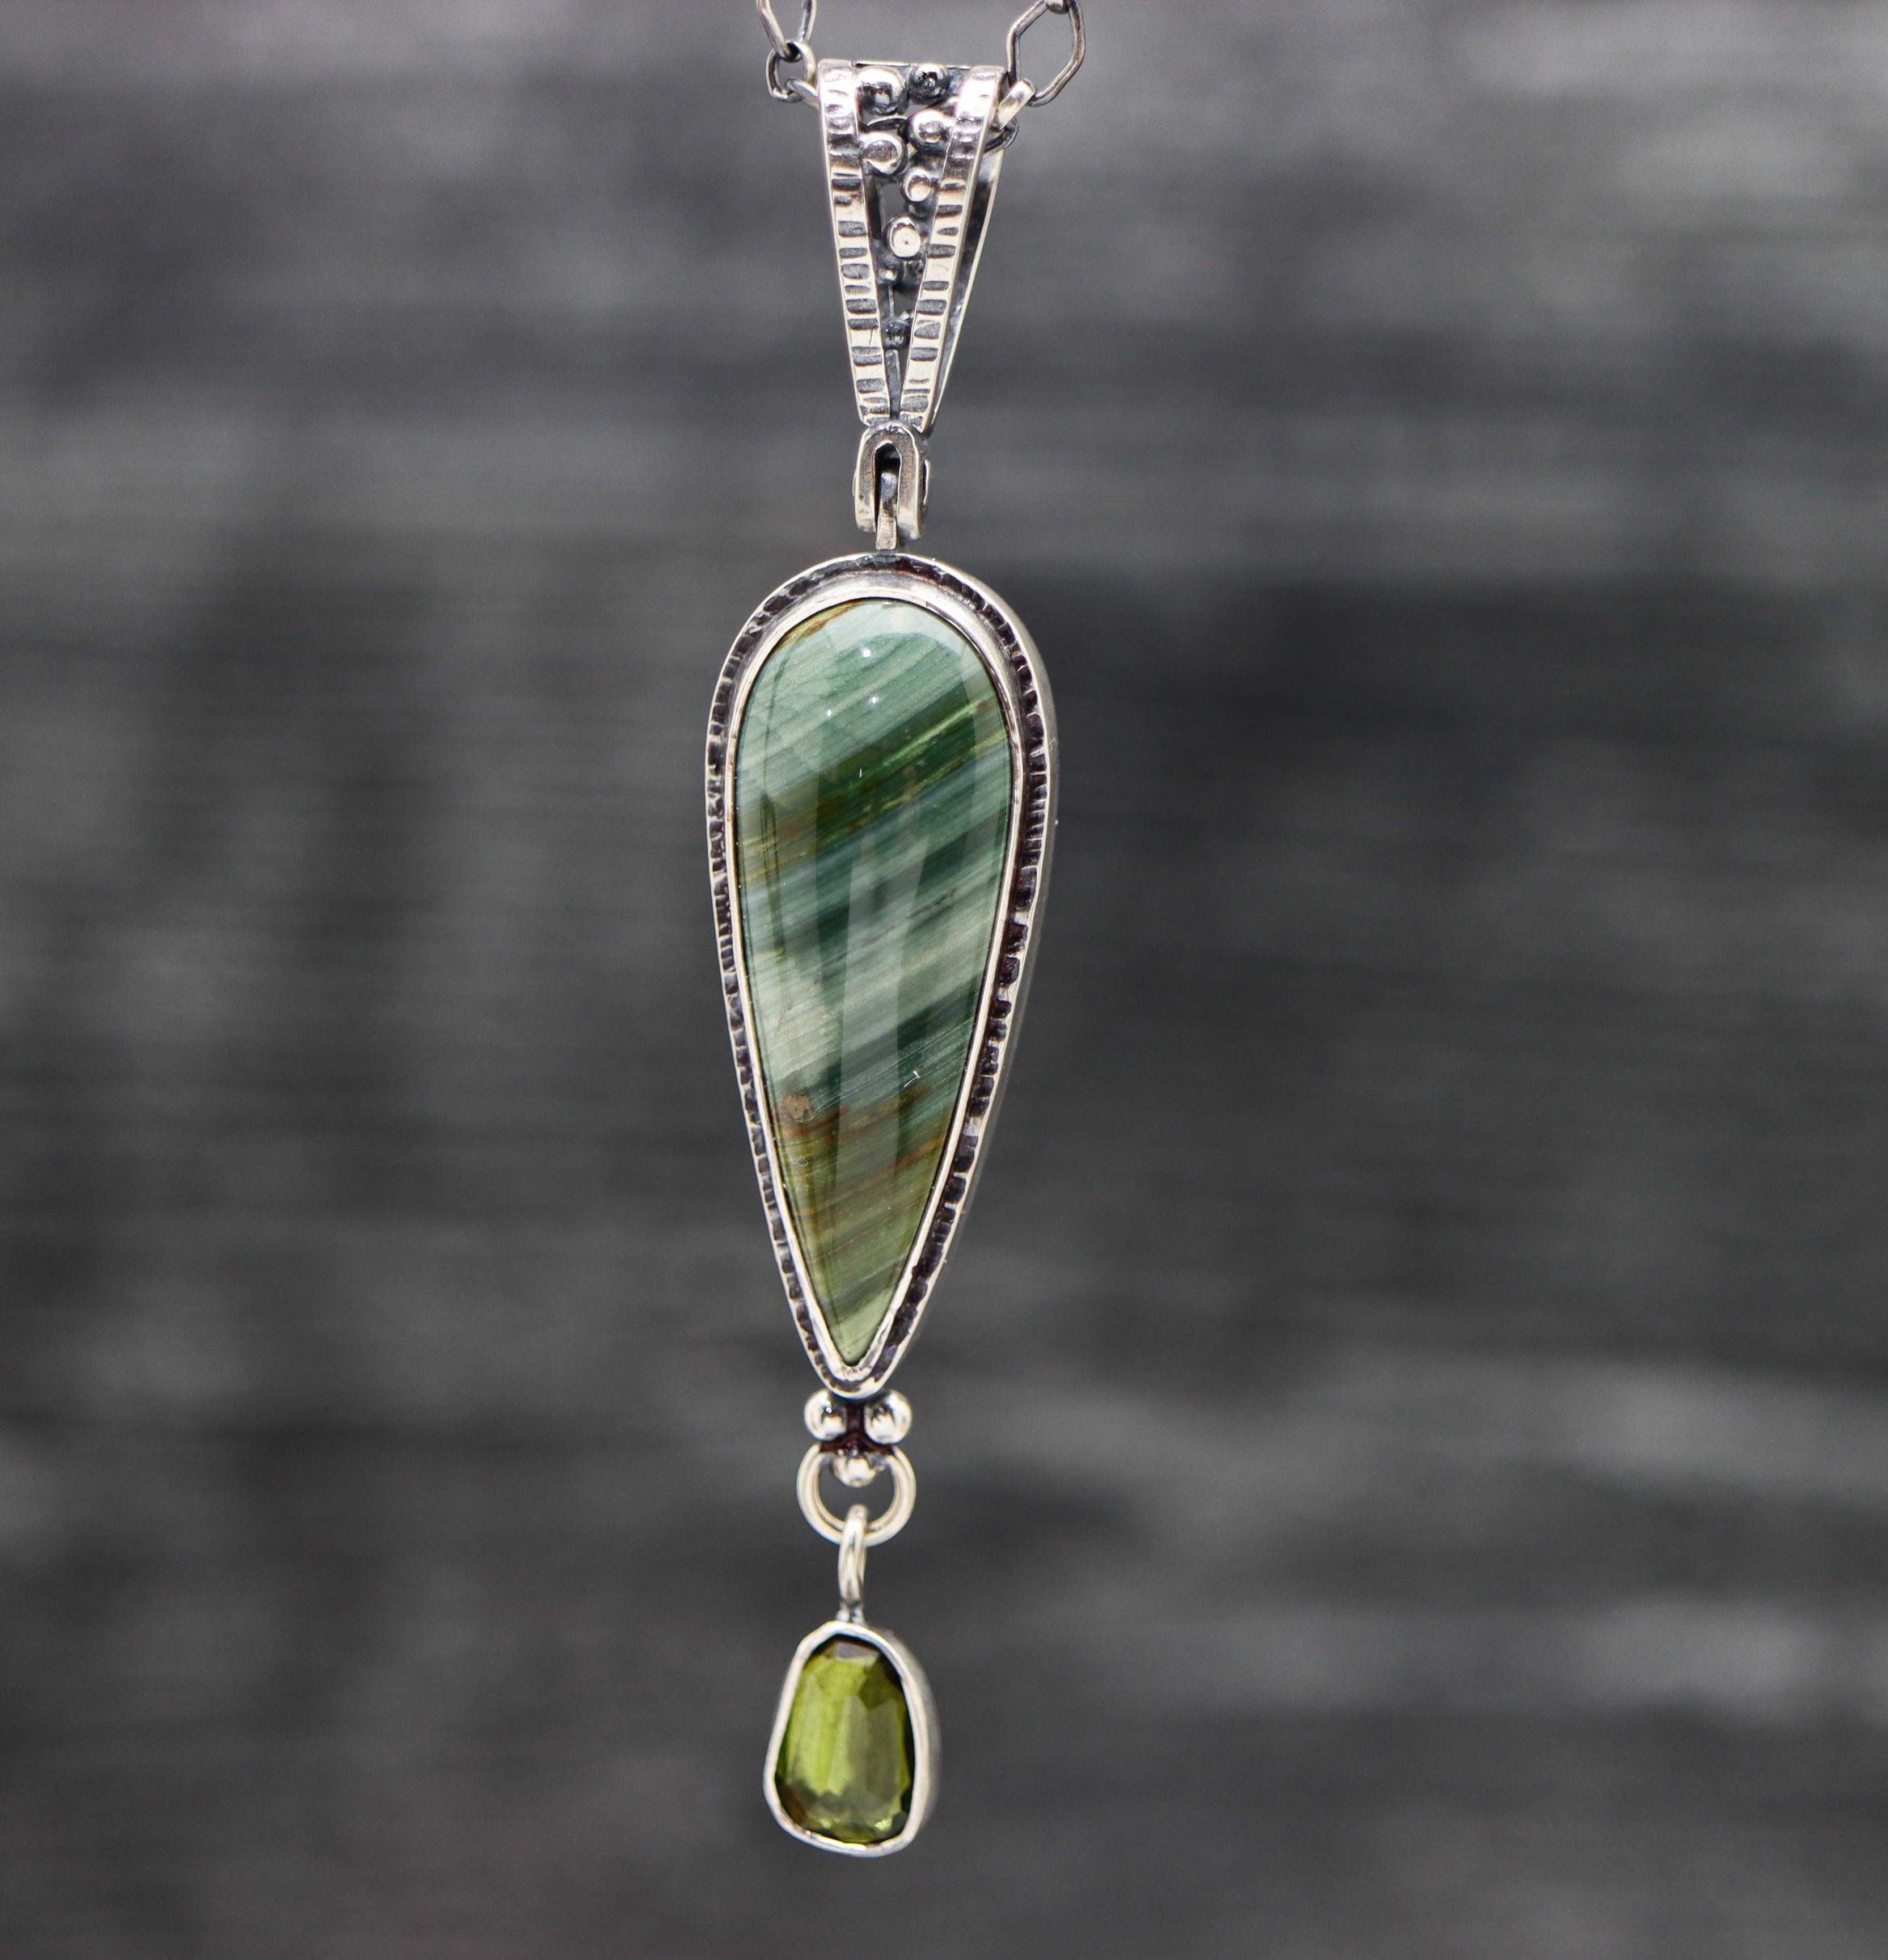 Caldera Paint and Green Tourmaline Pendant Sterling Silver One Of a Kind Gemstone Necklace